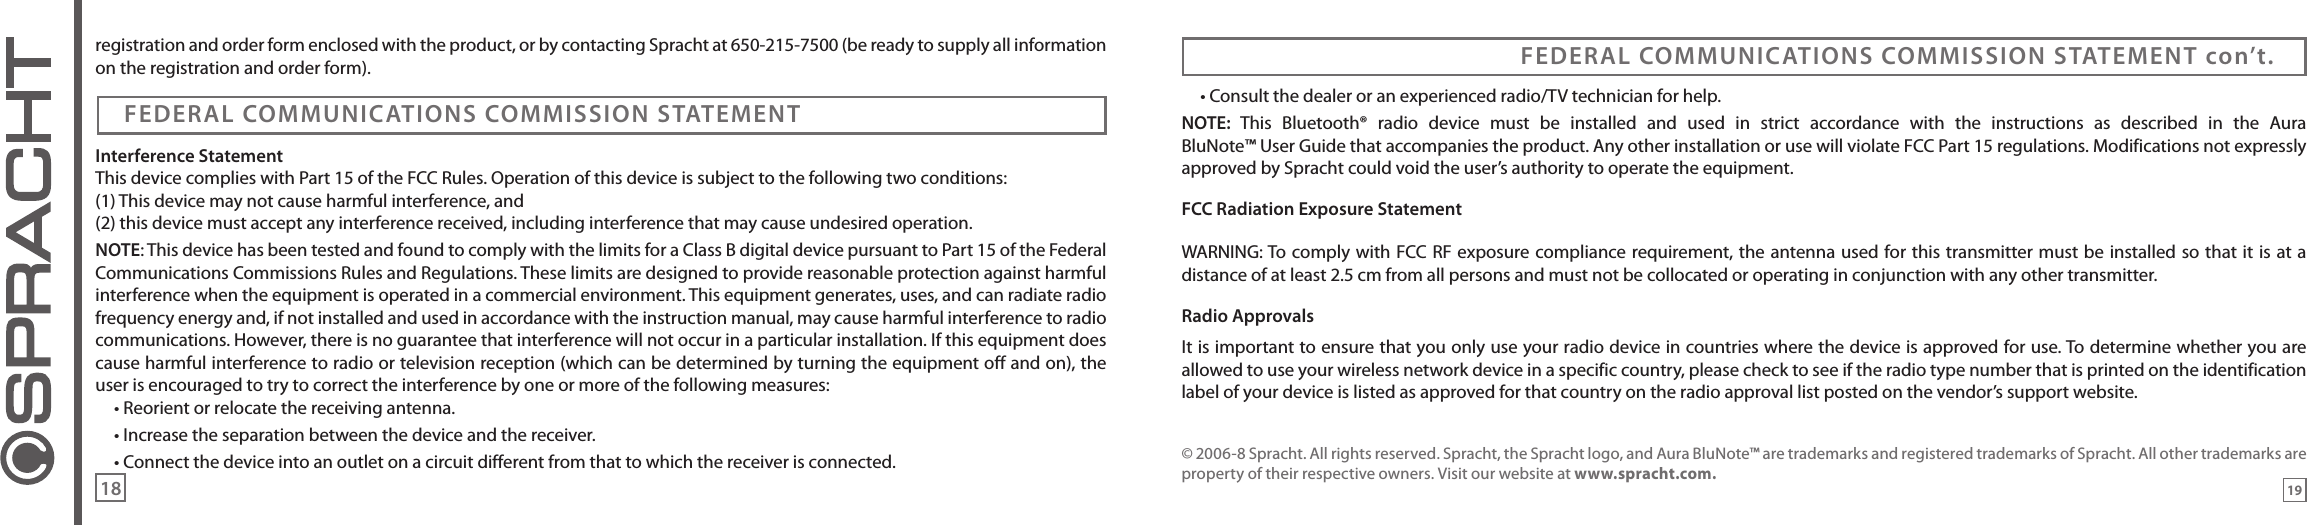 registration and order form enclosed with the product, or by contacting Spracht at 650-215-7500 (be ready to supply all information on the registration and order form).Interference StatementThis device complies with Part 15 of the FCC Rules. Operation of this device is subject to the following two conditions:(1) This device may not cause harmful interference, and (2) this device must accept any interference received, including interference that may cause undesired operation.NOTE: This device has been tested and found to comply with the limits for a Class B digital device pursuant to Part 15 of the Federal Communications Commissions Rules and Regulations. These limits are designed to provide reasonable protection against harmful interference when the equipment is operated in a commercial environment. This equipment generates, uses, and can radiate radio frequency energy and, if not installed and used in accordance with the instruction manual, may cause harmful interference to radio communications. However, there is no guarantee that interference will not occur in a particular installation. If this equipment does cause harmful interference to radio or television reception (which can be determined by turning the equipment off and on), the user is encouraged to try to correct the interference by one or more of the following measures:• Reorient or relocate the receiving antenna.• Increase the separation between the device and the receiver.• Connect the device into an outlet on a circuit different from that to which the receiver is connected.FEDERAL COMMUNICATIONS COMMISSION STATEMENTFEDERAL COMMUNICATIONS COMMISSION STATEMENT con’t.• Consult the dealer or an experienced radio/TV technician for help.NOTE:  This  Bluetooth®  radio  device  must  be  installed  and  used  in  strict  accordance  with  the  instructions  as  described  in  the  Aura  BluNote™ User Guide that accompanies the product. Any other installation or use will violate FCC Part 15 regulations. Modifications not expressly approved by Spracht could void the user’s authority to operate the equipment.FCC Radiation Exposure StatementWARNING: To comply with FCC RF exposure compliance requirement, the  antenna used for this transmitter must be installed so that it is at a distance of at least 2.5 cm from all persons and must not be collocated or operating in conjunction with any other transmitter. Radio ApprovalsIt is important to ensure that you only use your radio device in countries where the device is approved for use. To determine whether you are allowed to use your wireless network device in a specific country, please check to see if the radio type number that is printed on the identification label of your device is listed as approved for that country on the radio approval list posted on the vendor’s support website.© 2006-8 Spracht. All rights reserved. Spracht, the Spracht logo, and Aura BluNote™ are trademarks and registered trademarks of Spracht. All other trademarks are property of their respective owners. Visit our website at www.spracht.com.1918